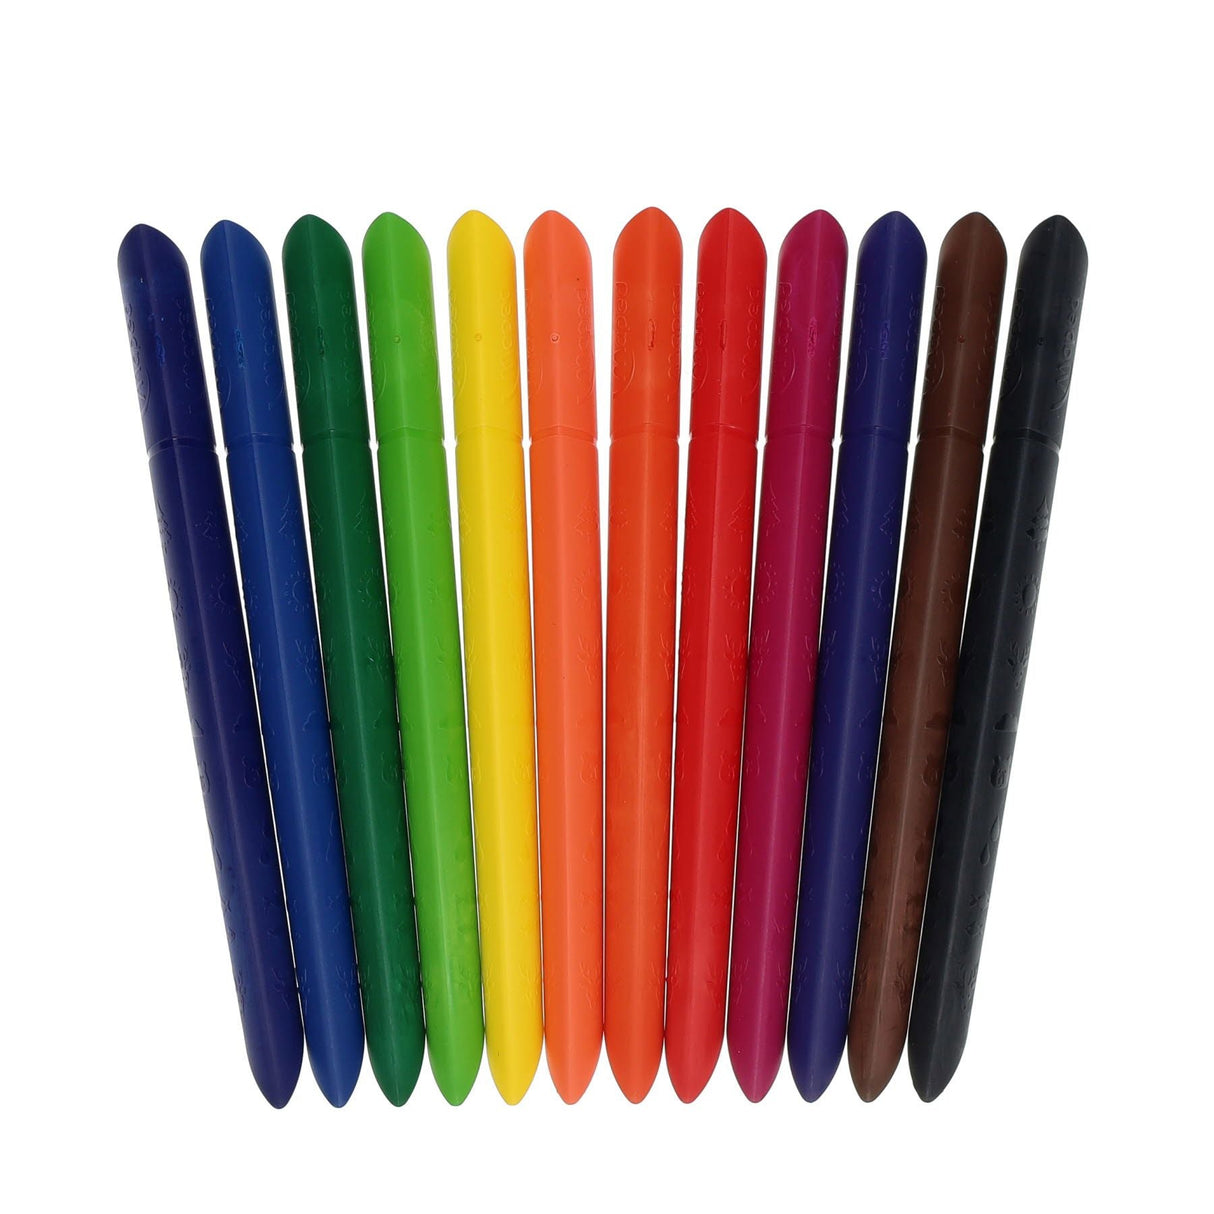 Maped School Colorpeps Colouring Pencils - Pack of 72 | Stationery Shop UK